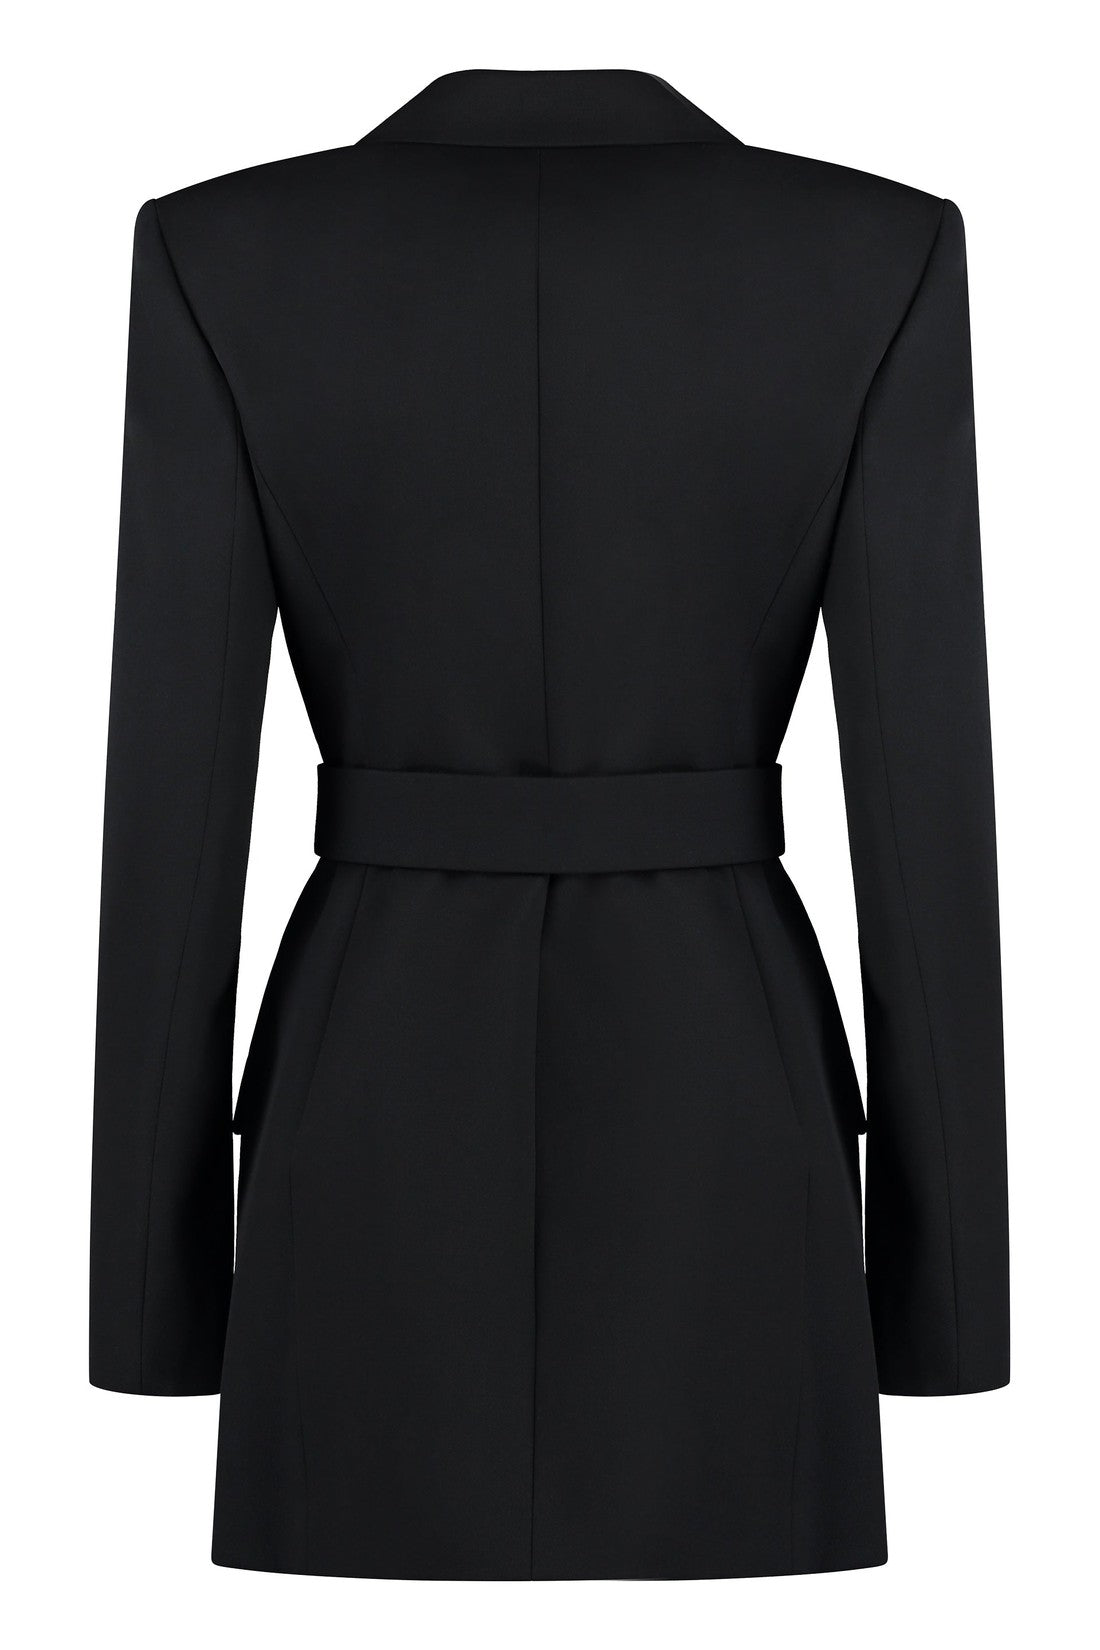 Alexander Wang-OUTLET-SALE-Double breasted blazer dress-ARCHIVIST